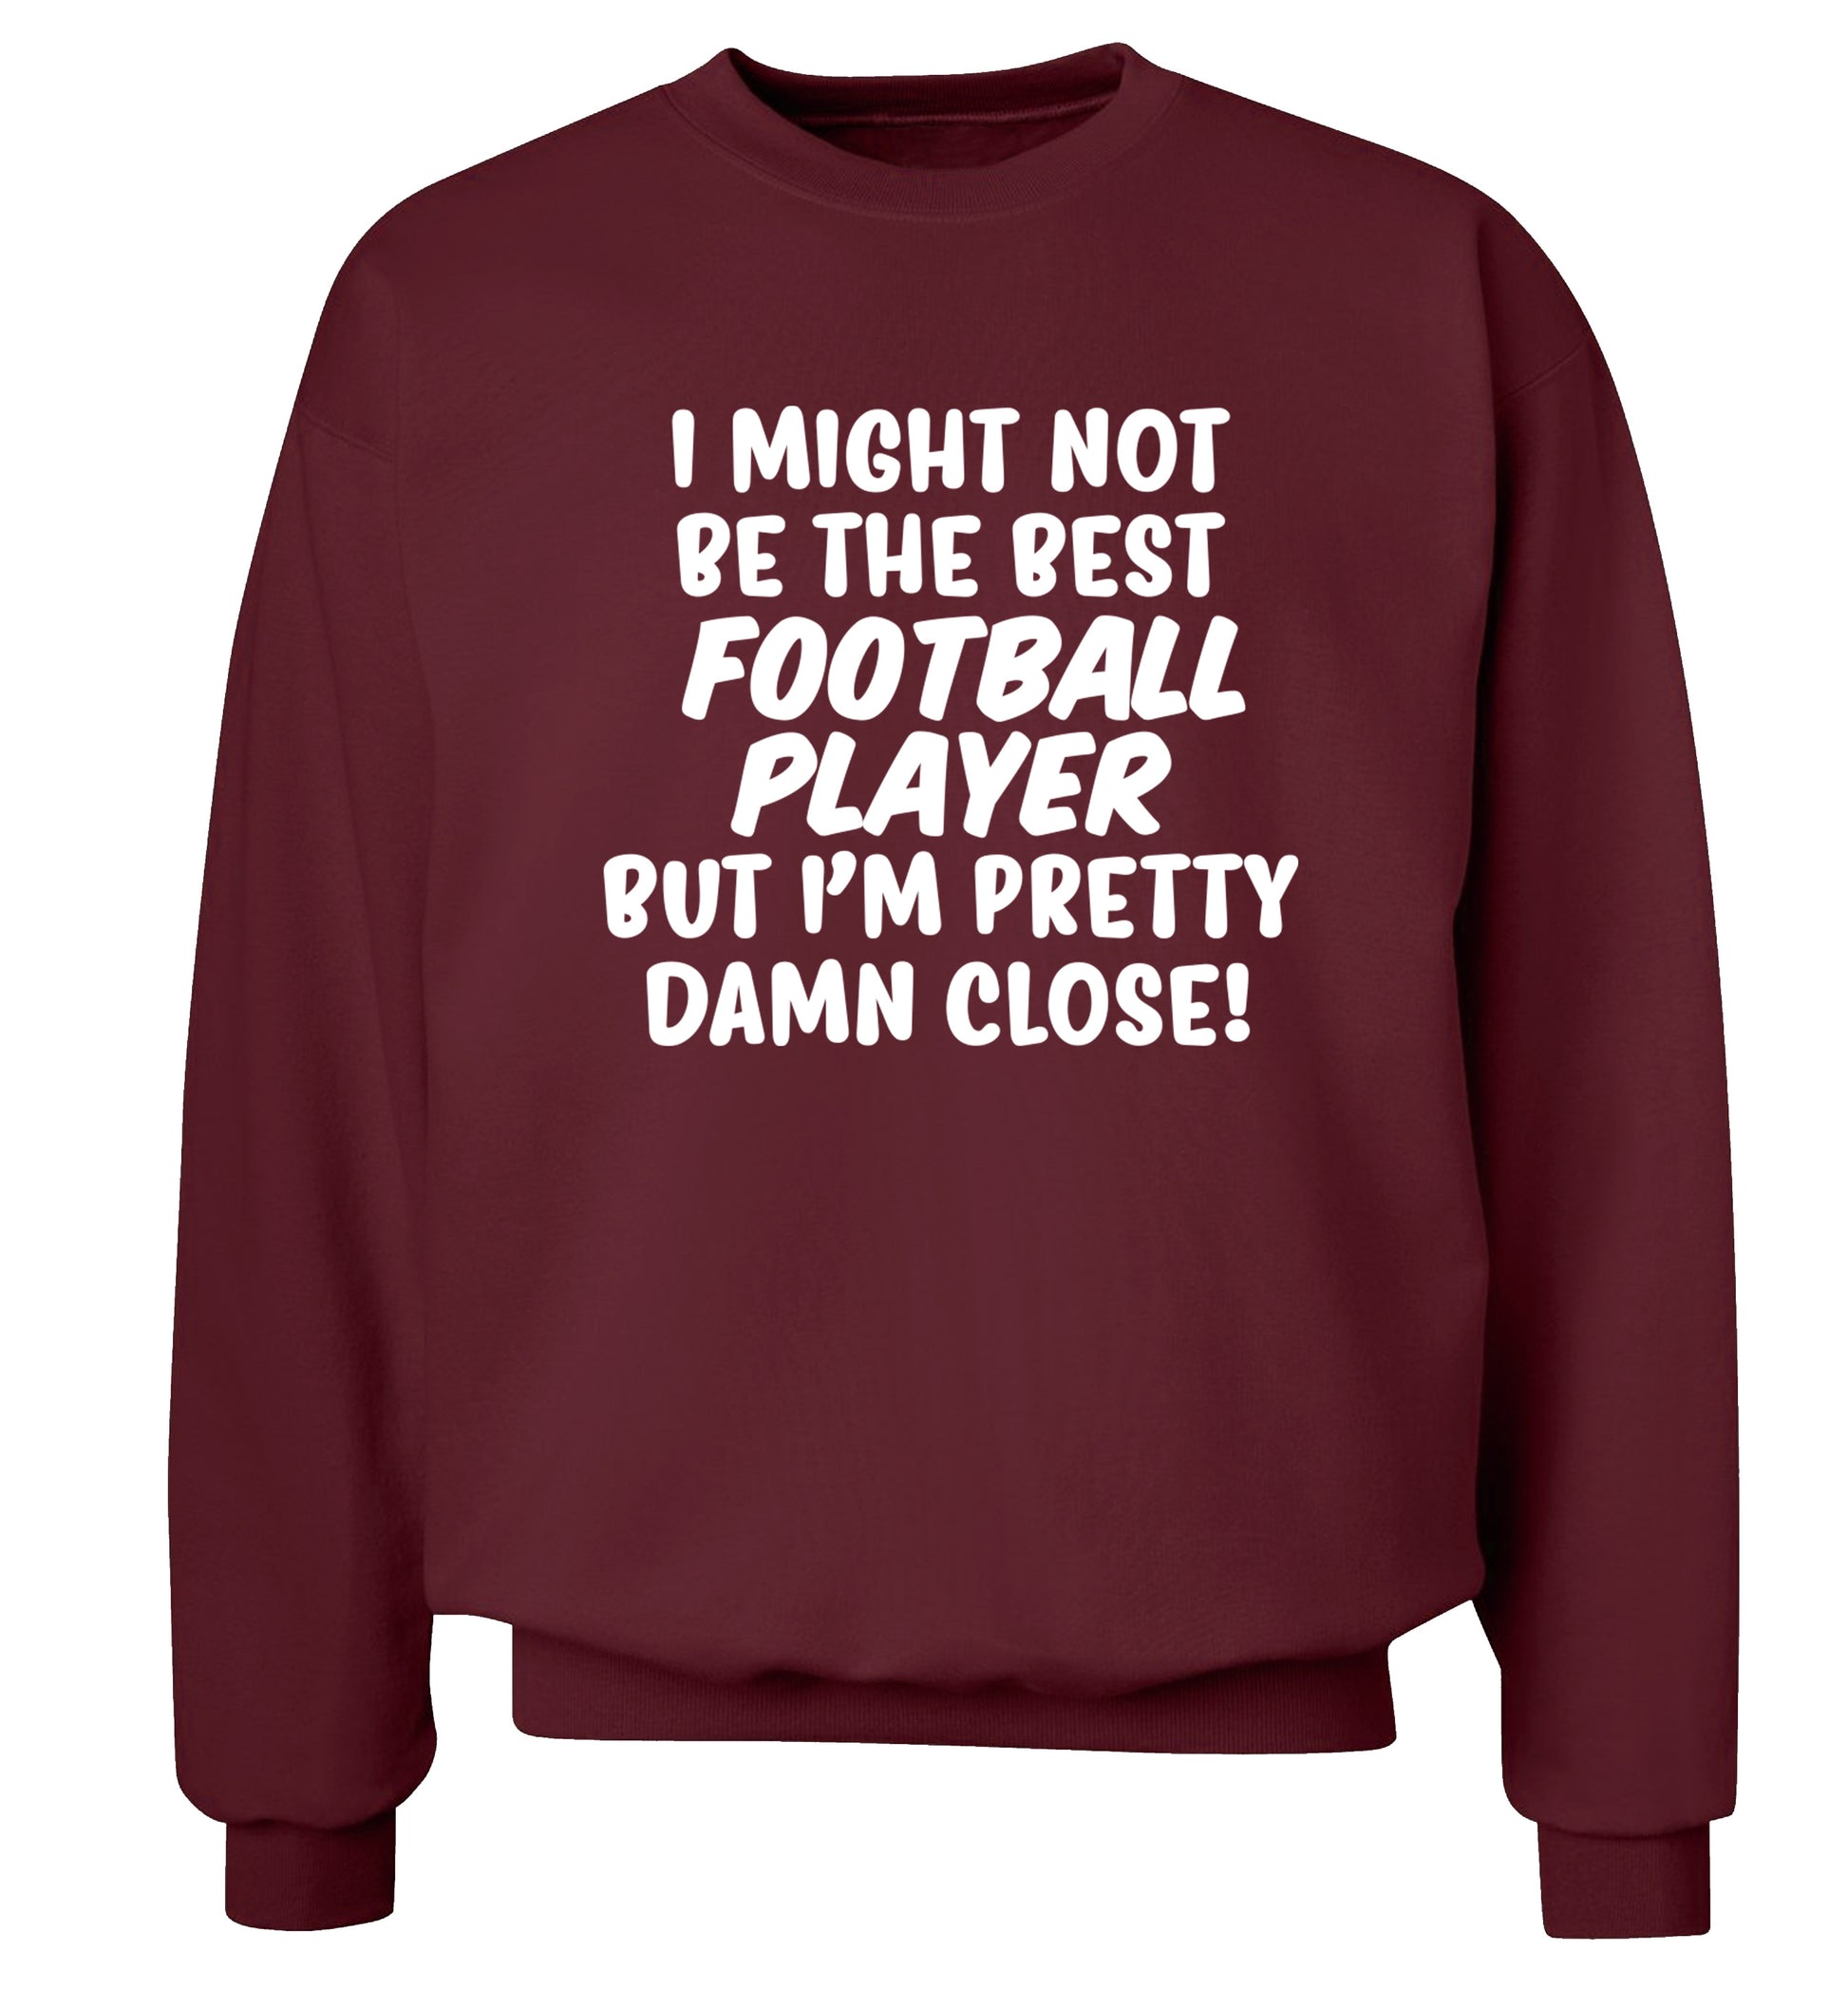 I might not be the best football player but I'm pretty close! Adult's unisexmaroon Sweater 2XL